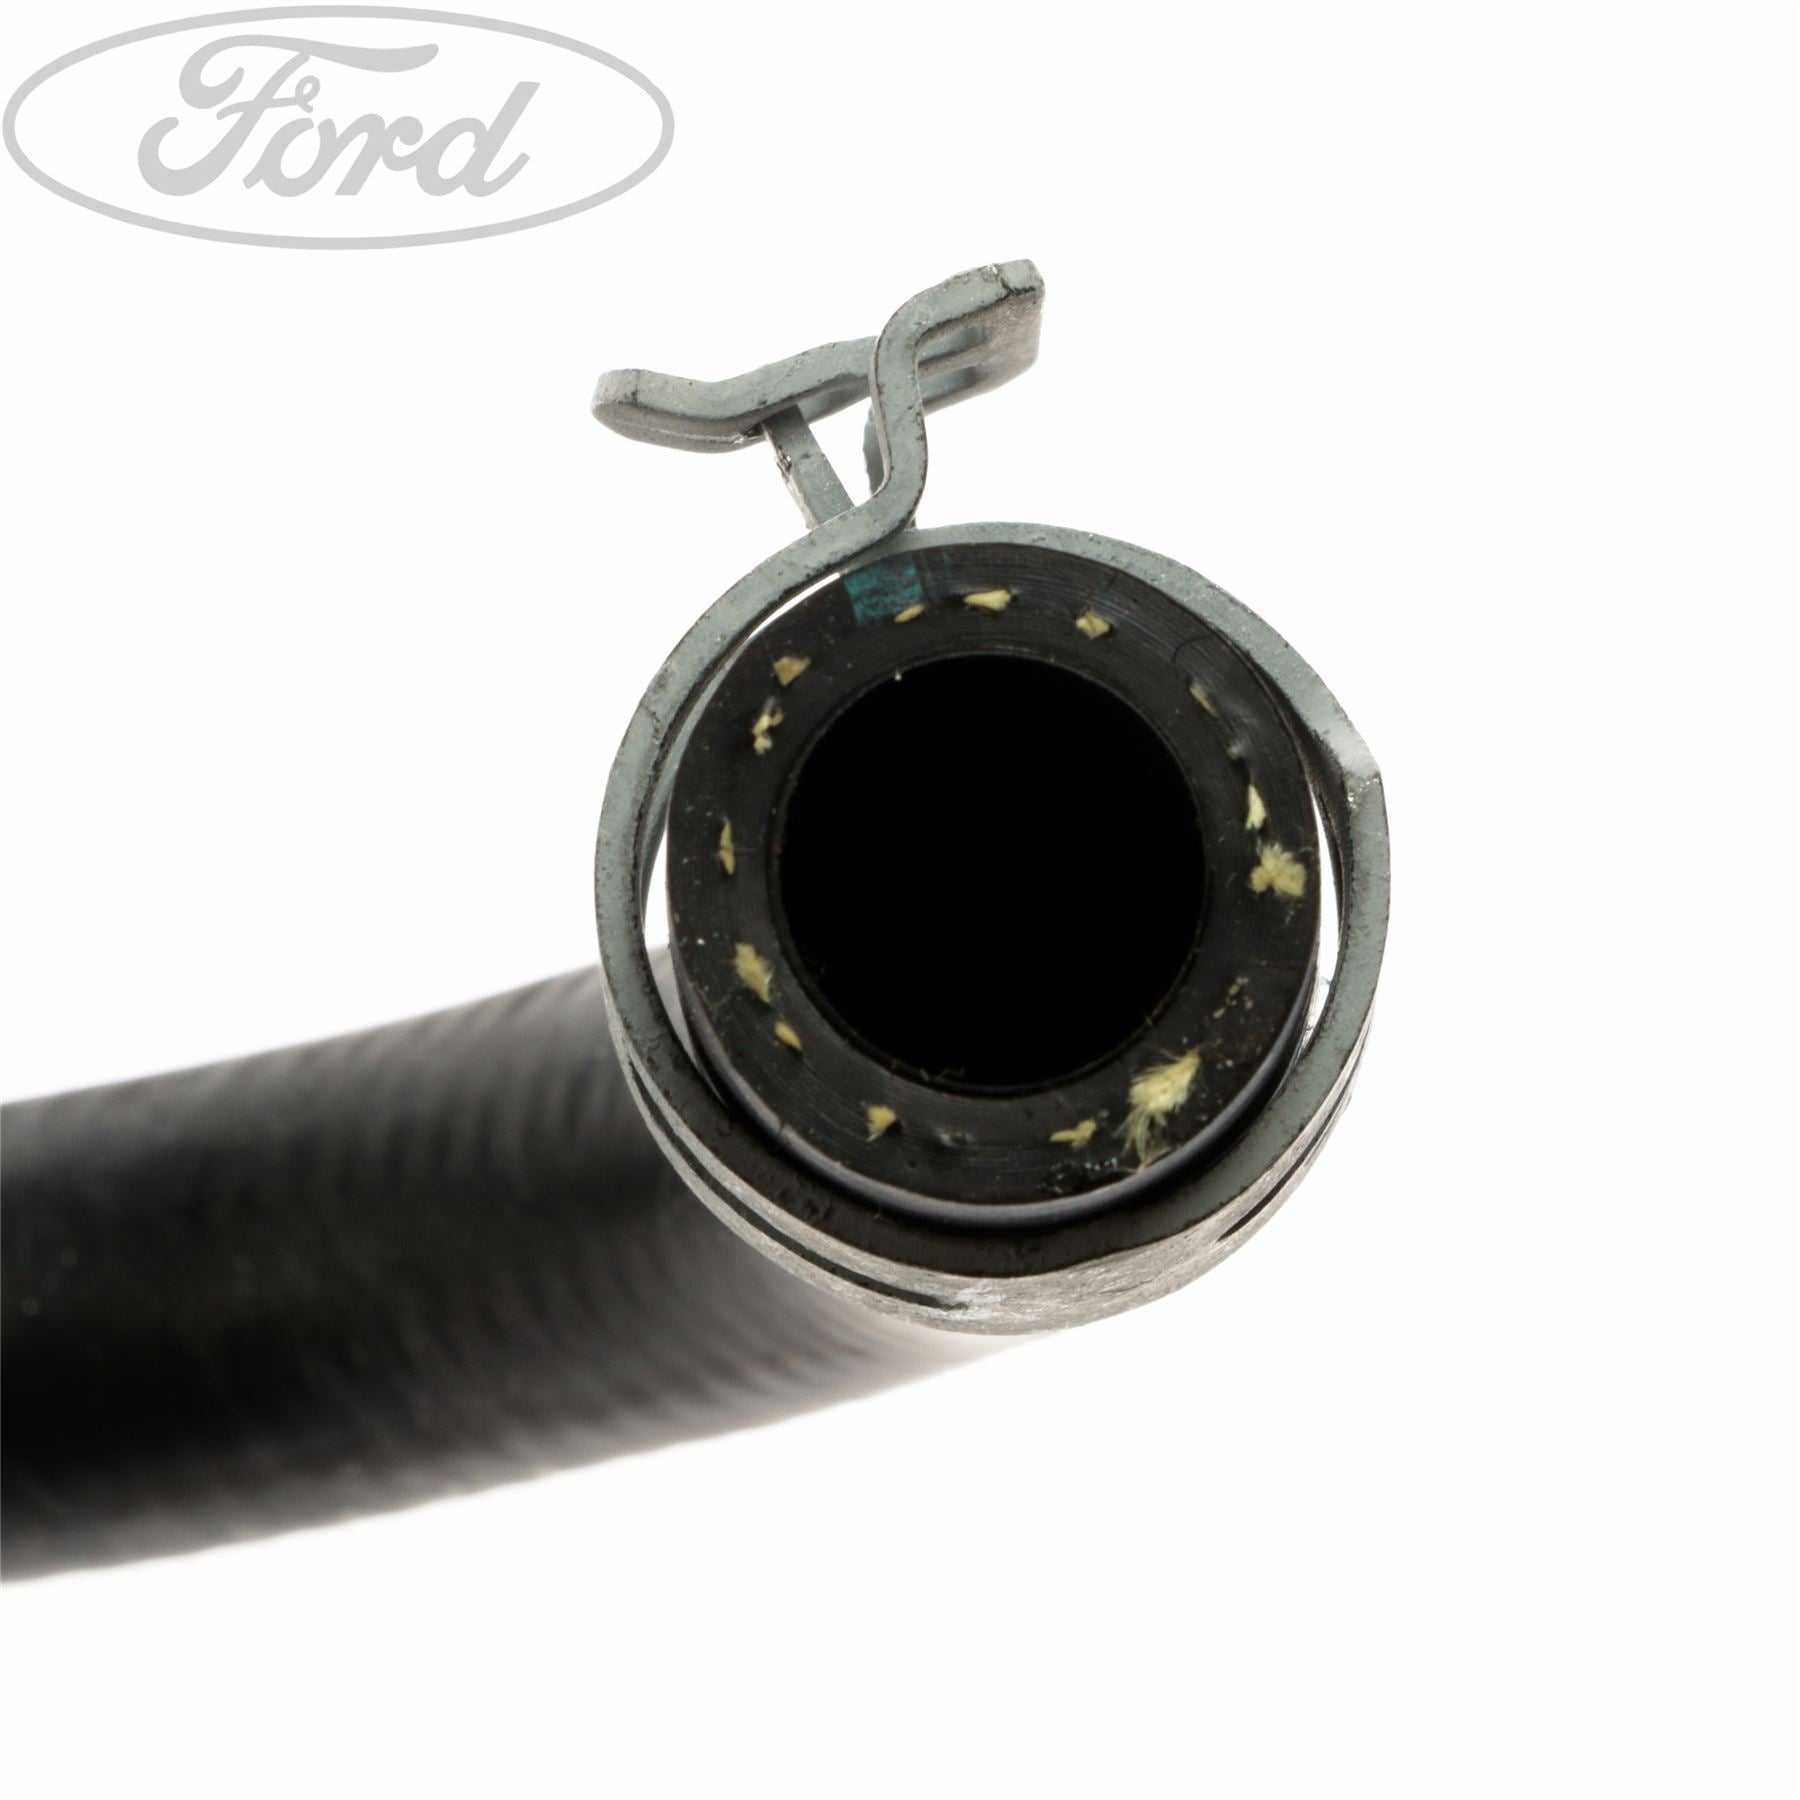 Ford, TURBOCHARGER TO INTERCOOLER HOSE